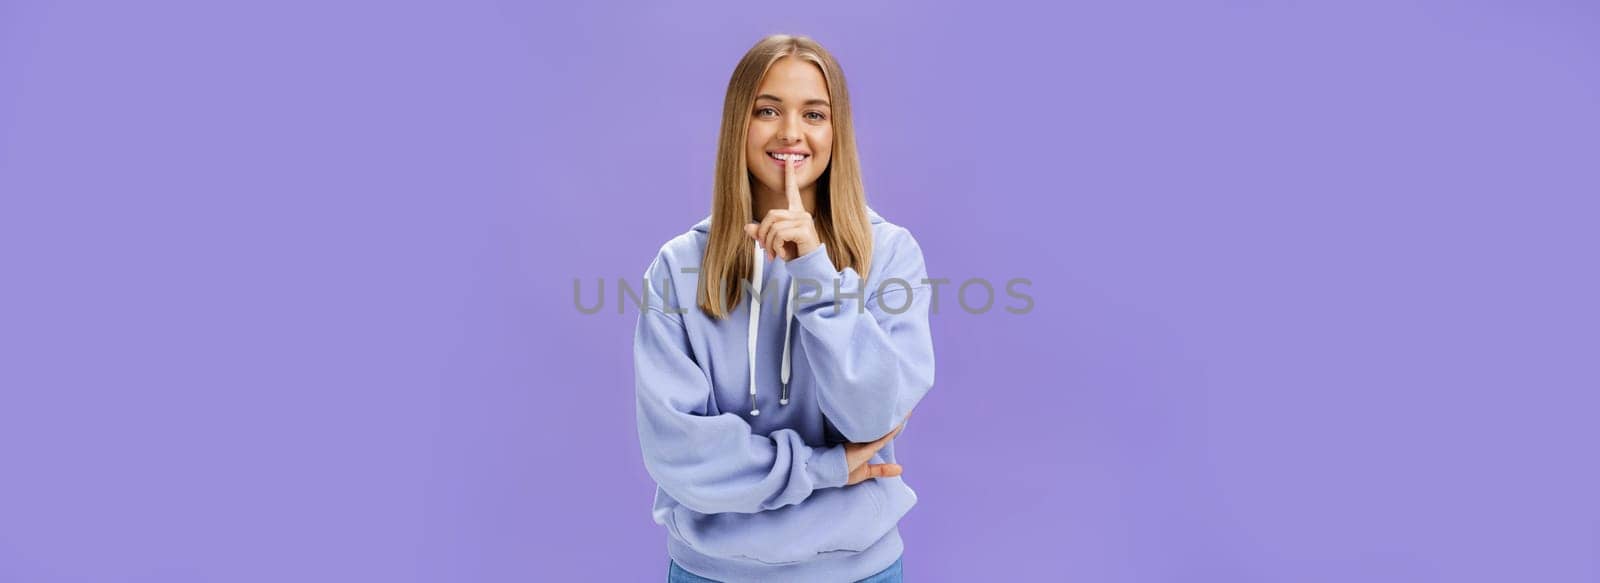 Portrait of joyful cute feminine young woman in hoodie smiling happily showing shush gesture hiding surprise asking keep secret standing amused and carefree against purple background. Copy space